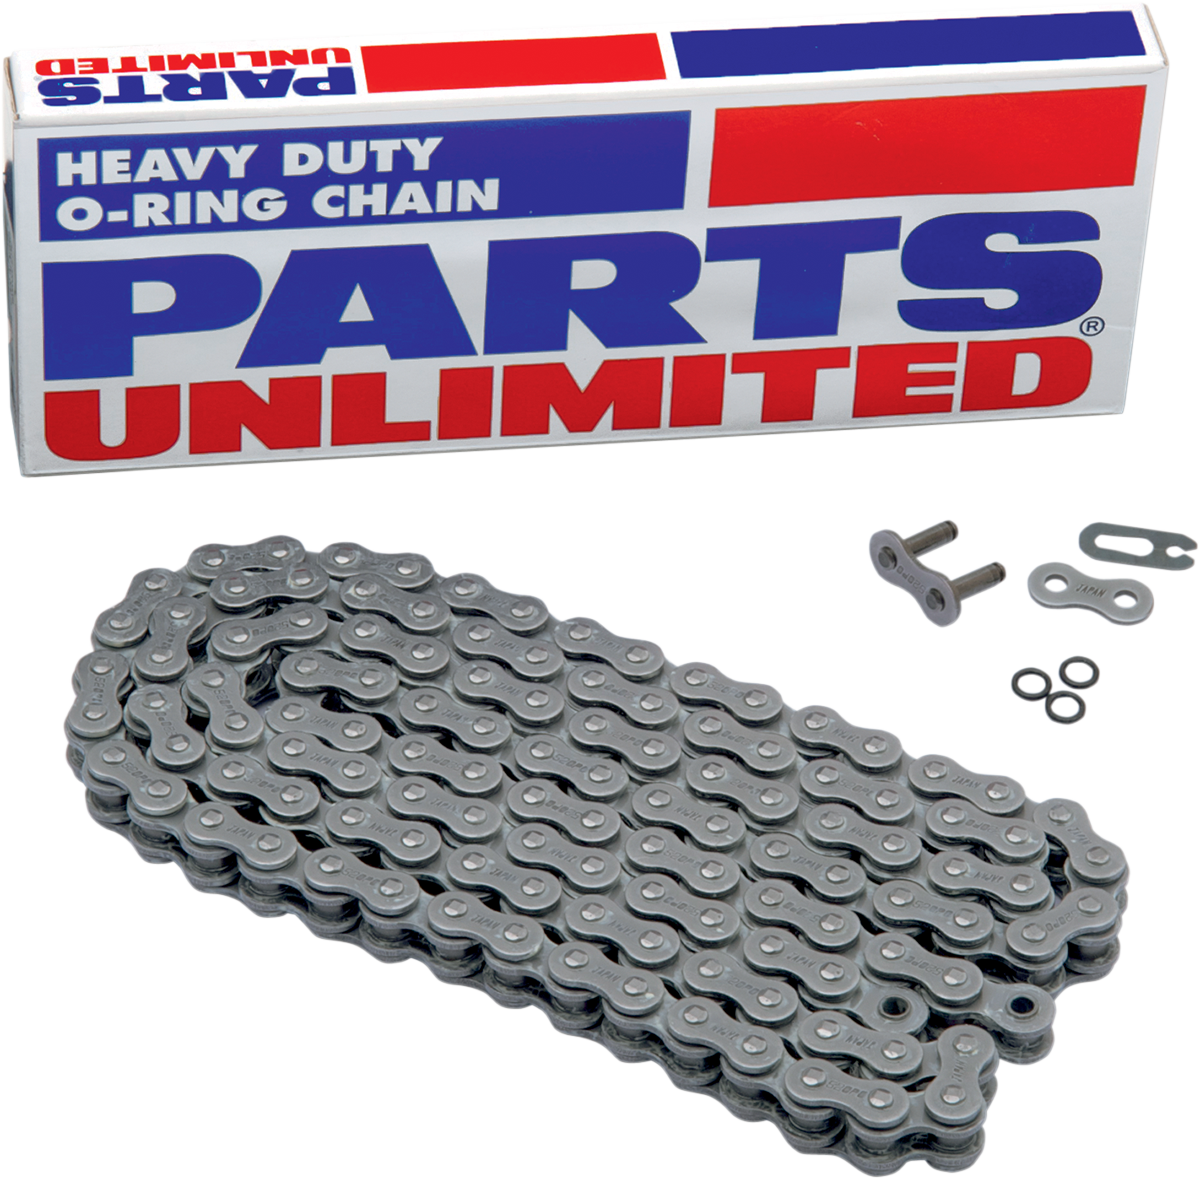 PARTS UNLIMITED-CHAIN MOTORCYCLE CHAIN CHAIN PU 530 O-RING X 25F